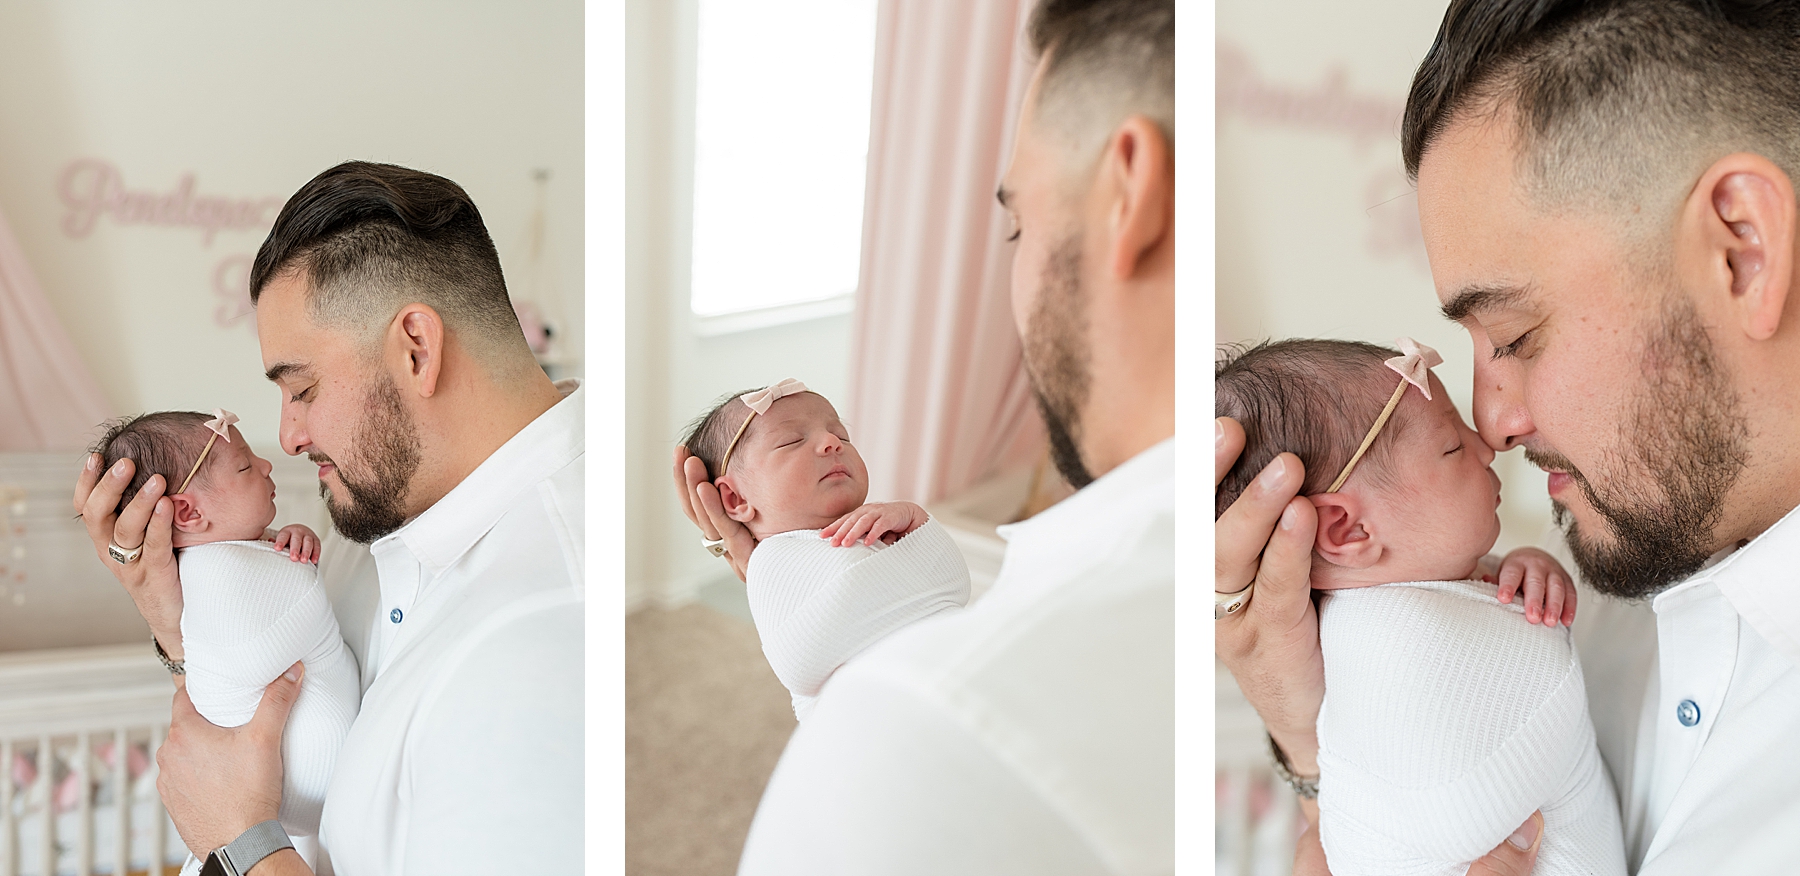 Dad holding newborn baby girl in white swaddle | Lindsey Dutton Photography | Dallas Area Family Photographer | newborn session, newborn posing ideas, newborn photos, girl nursery inspiration | via lindseyduttonphotography.com